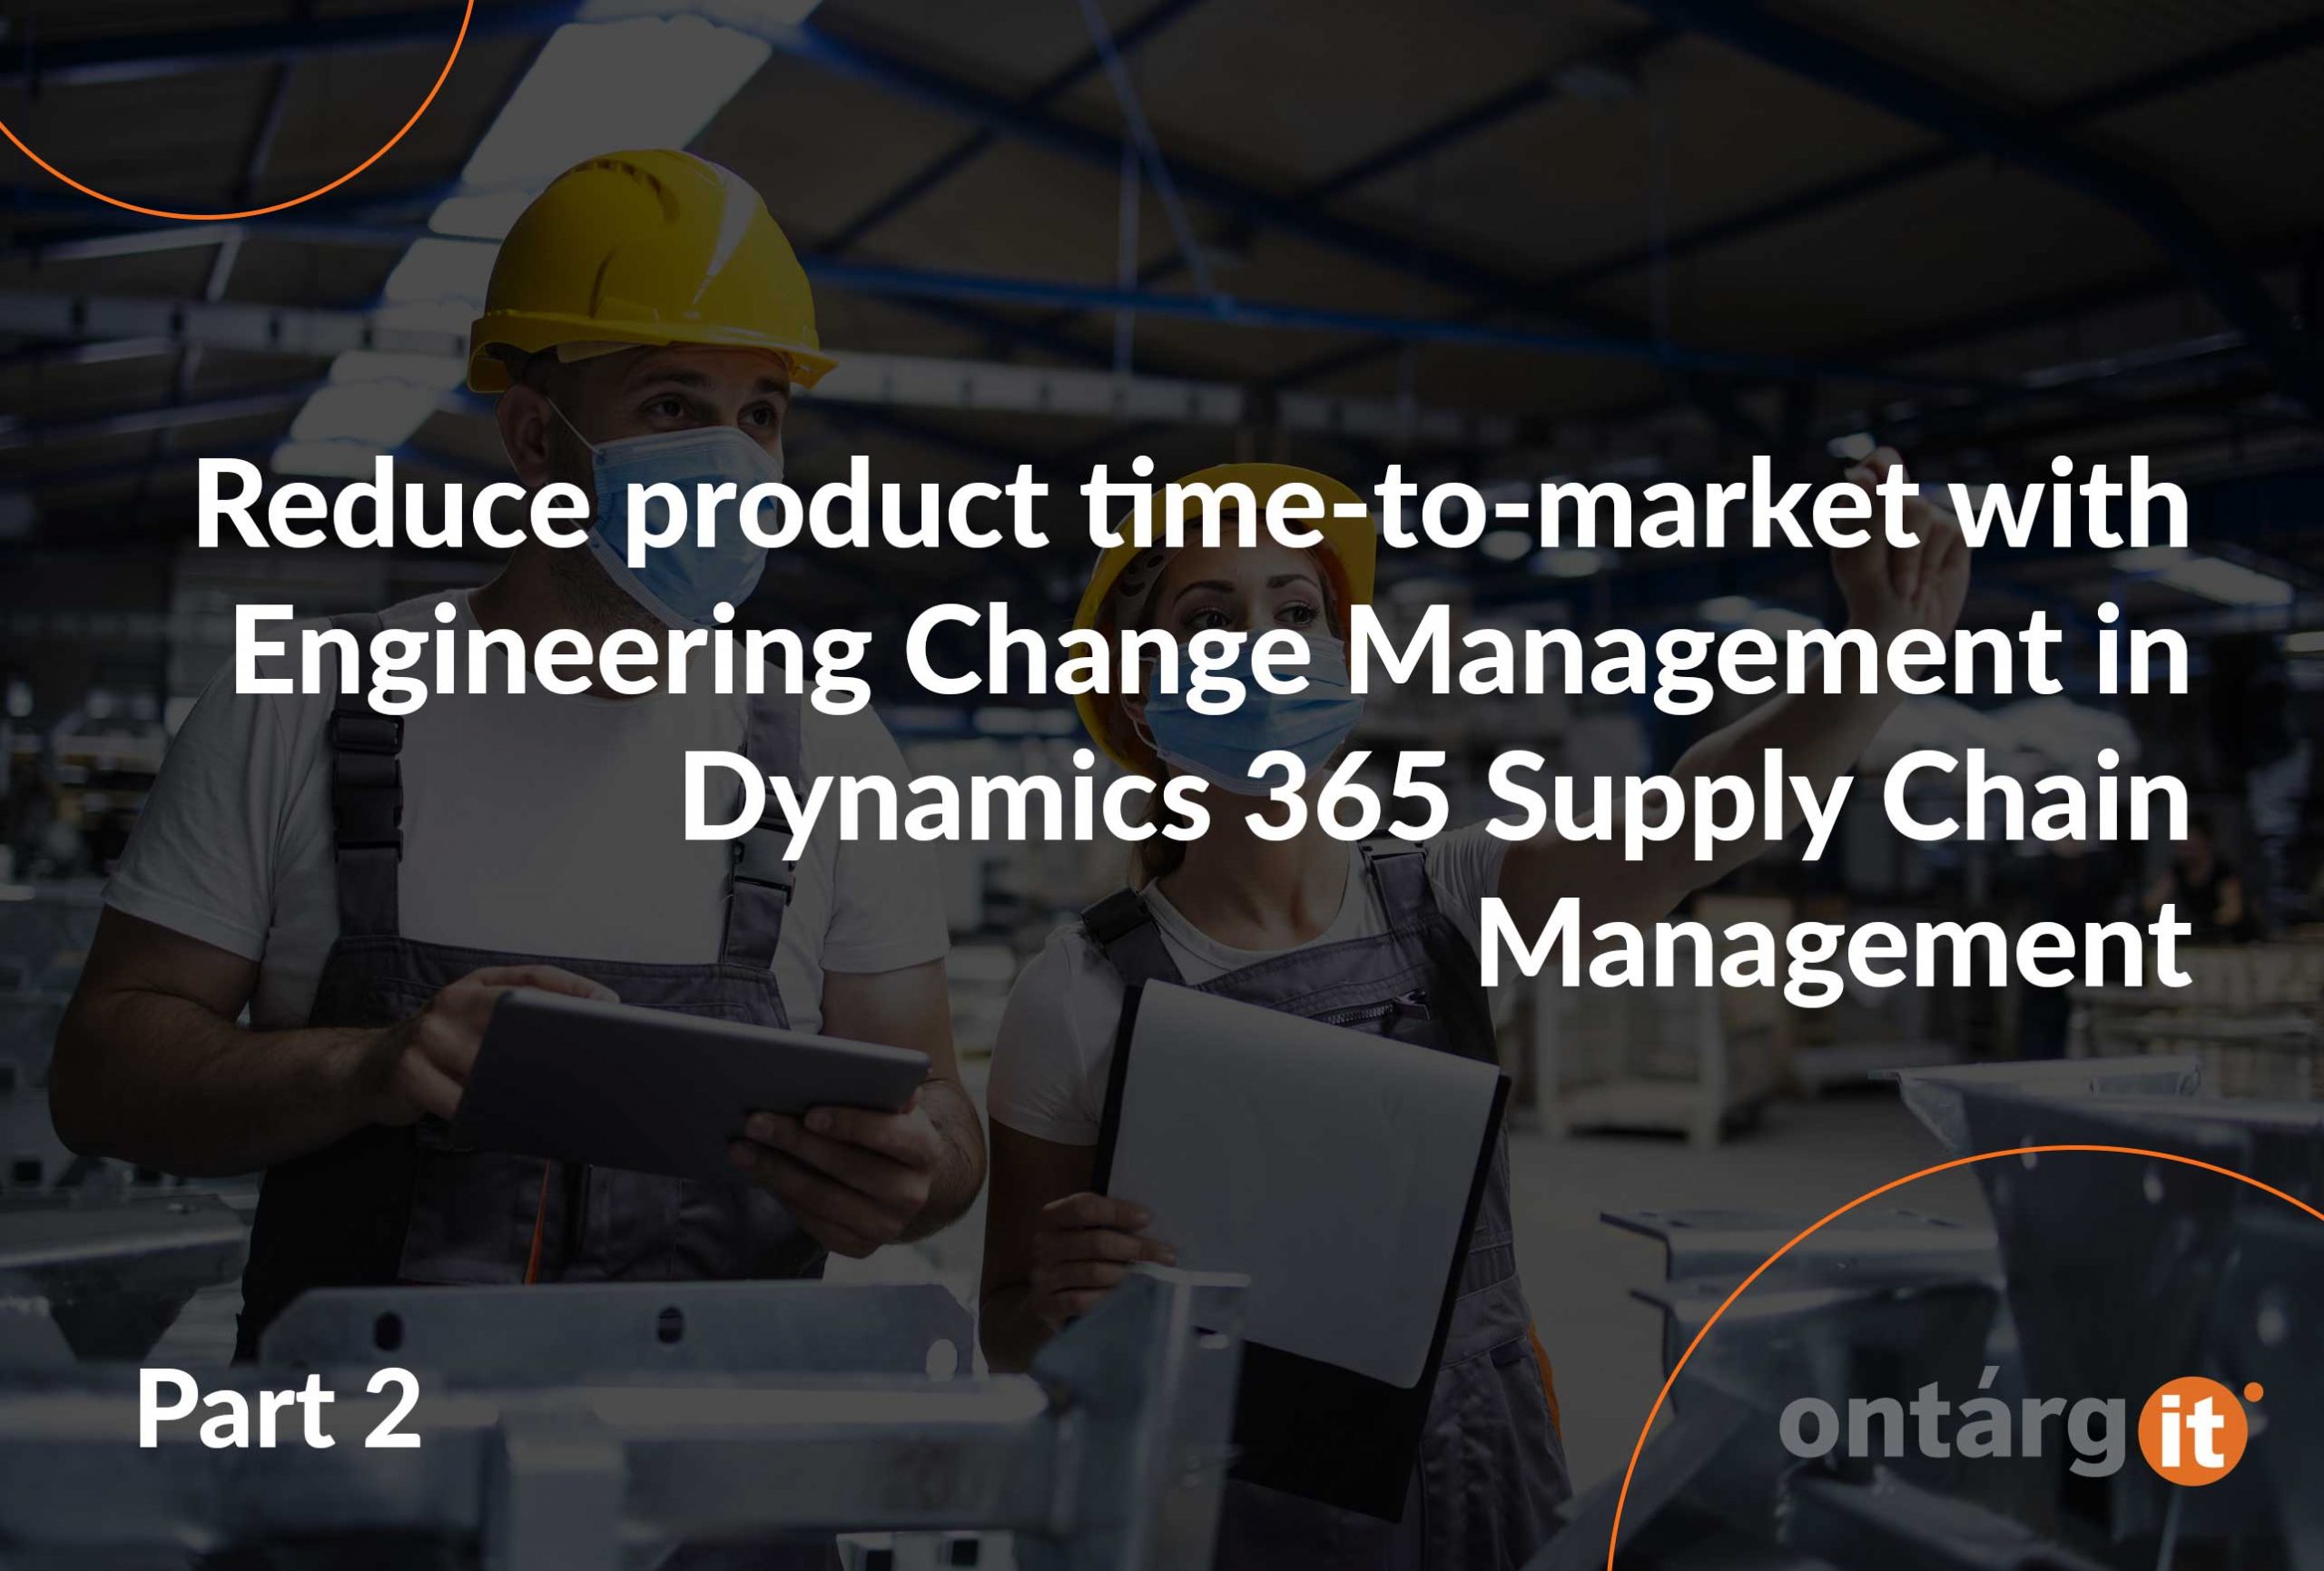 Reduce-product-time-to-market-with-Engineering-Change-Management-in-D365-SCM_part_2